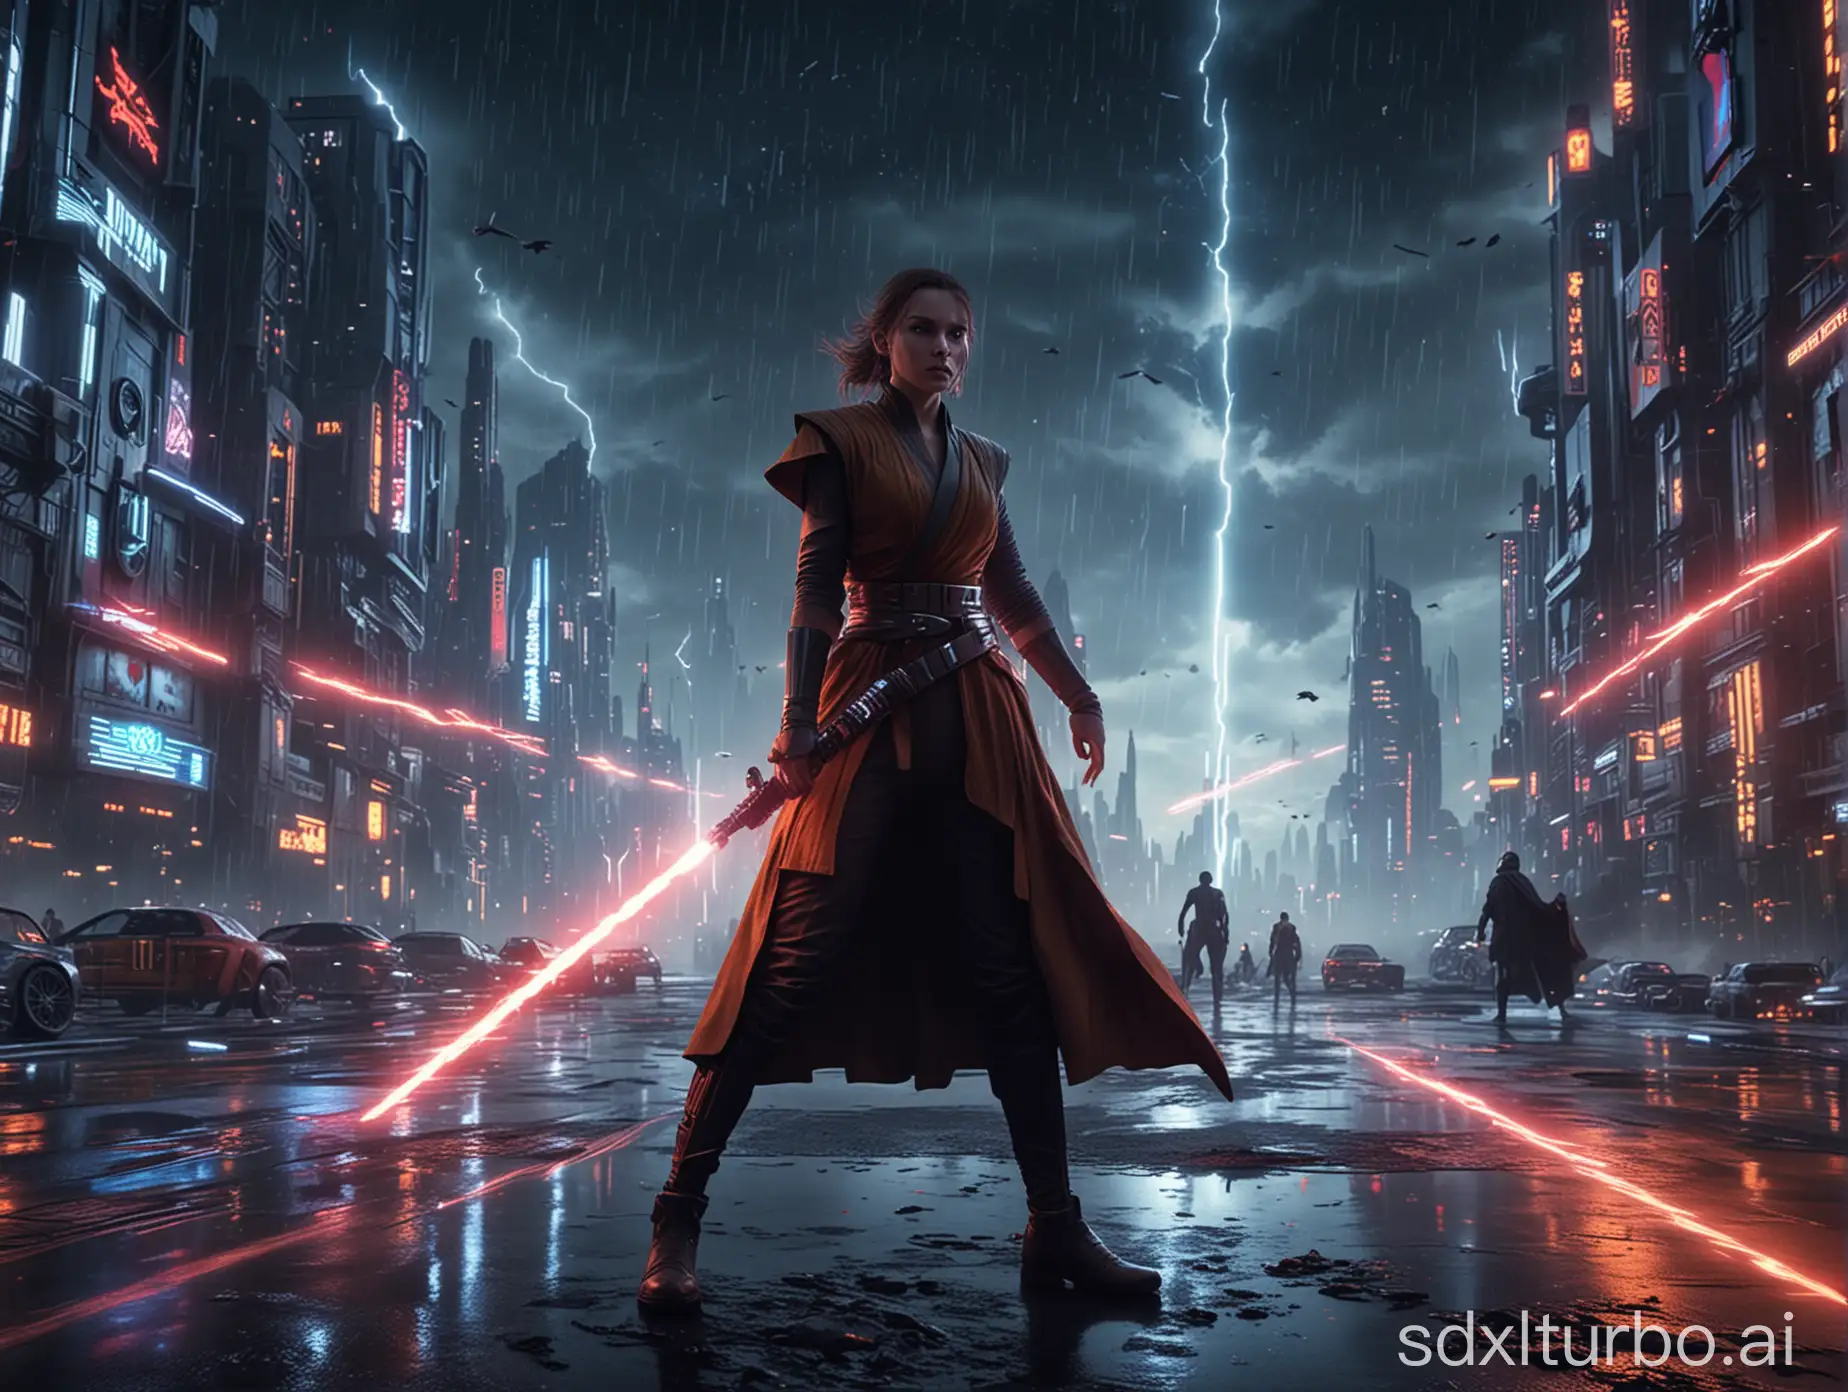 Epic-Jedi-Duel-Amidst-Futuristic-Cityscape-with-Lightsabers-and-Lightning